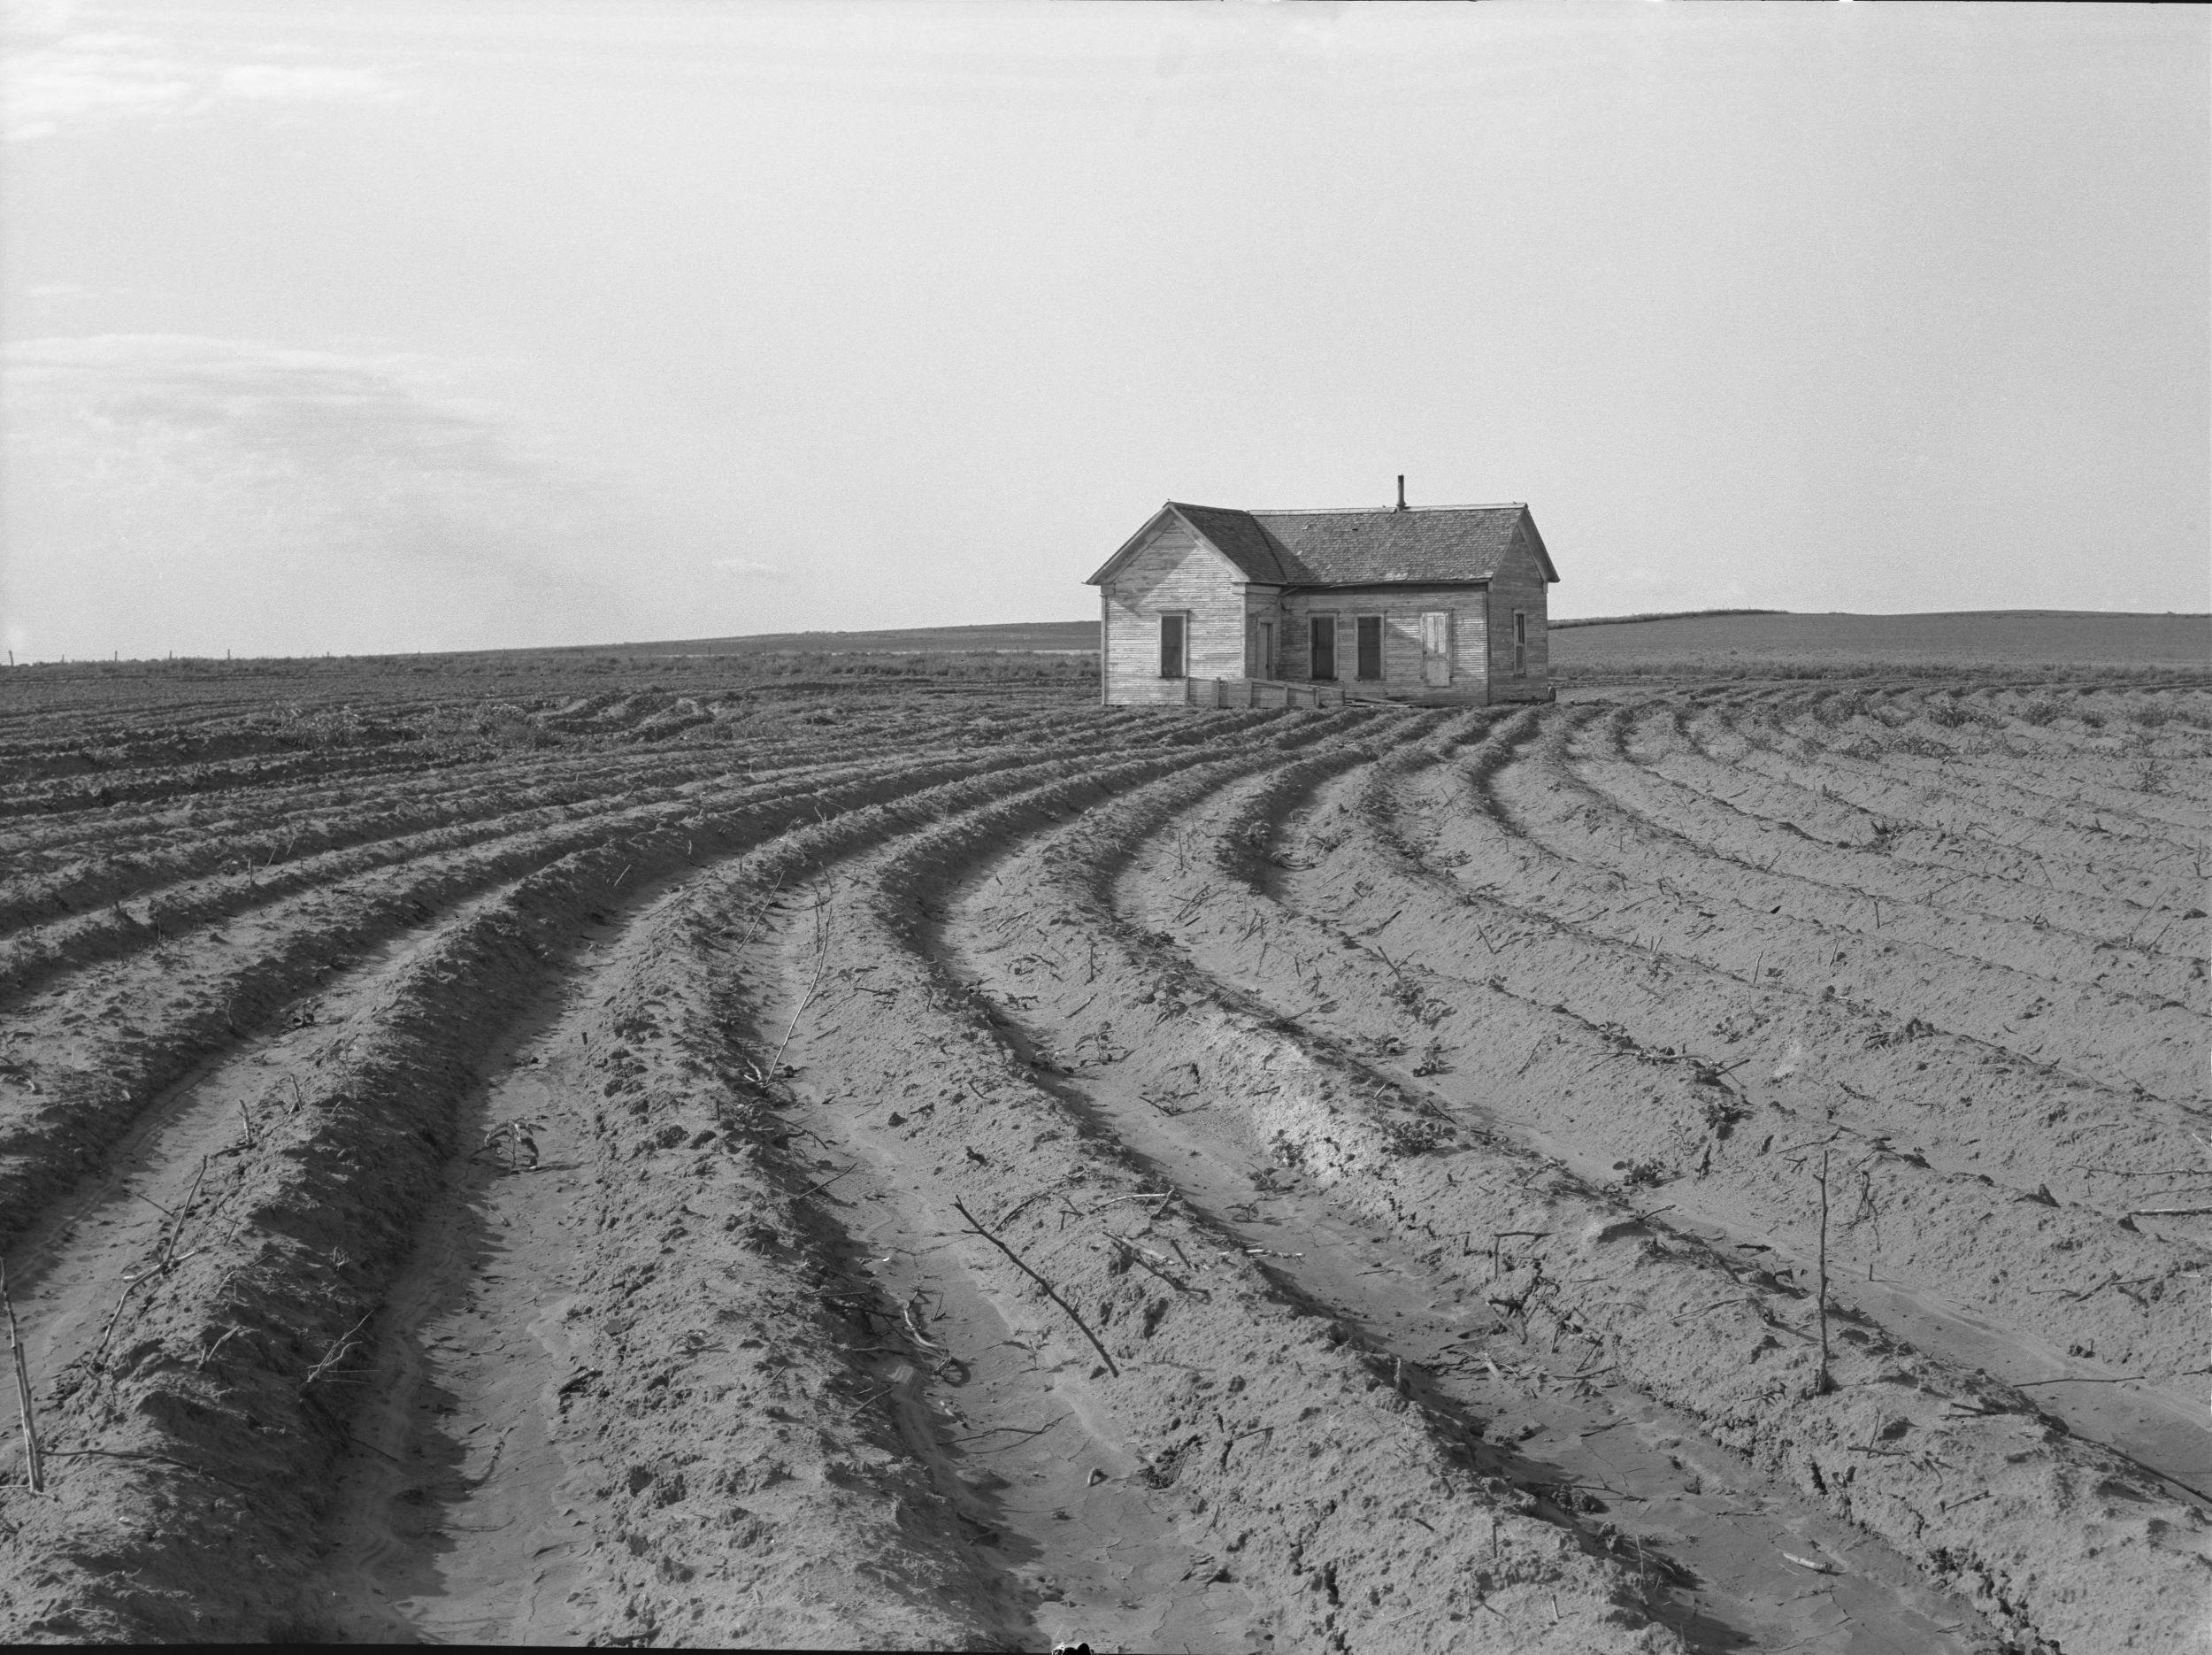 Black-and-white photograph of a farmhouse in the middle of a plowed field.